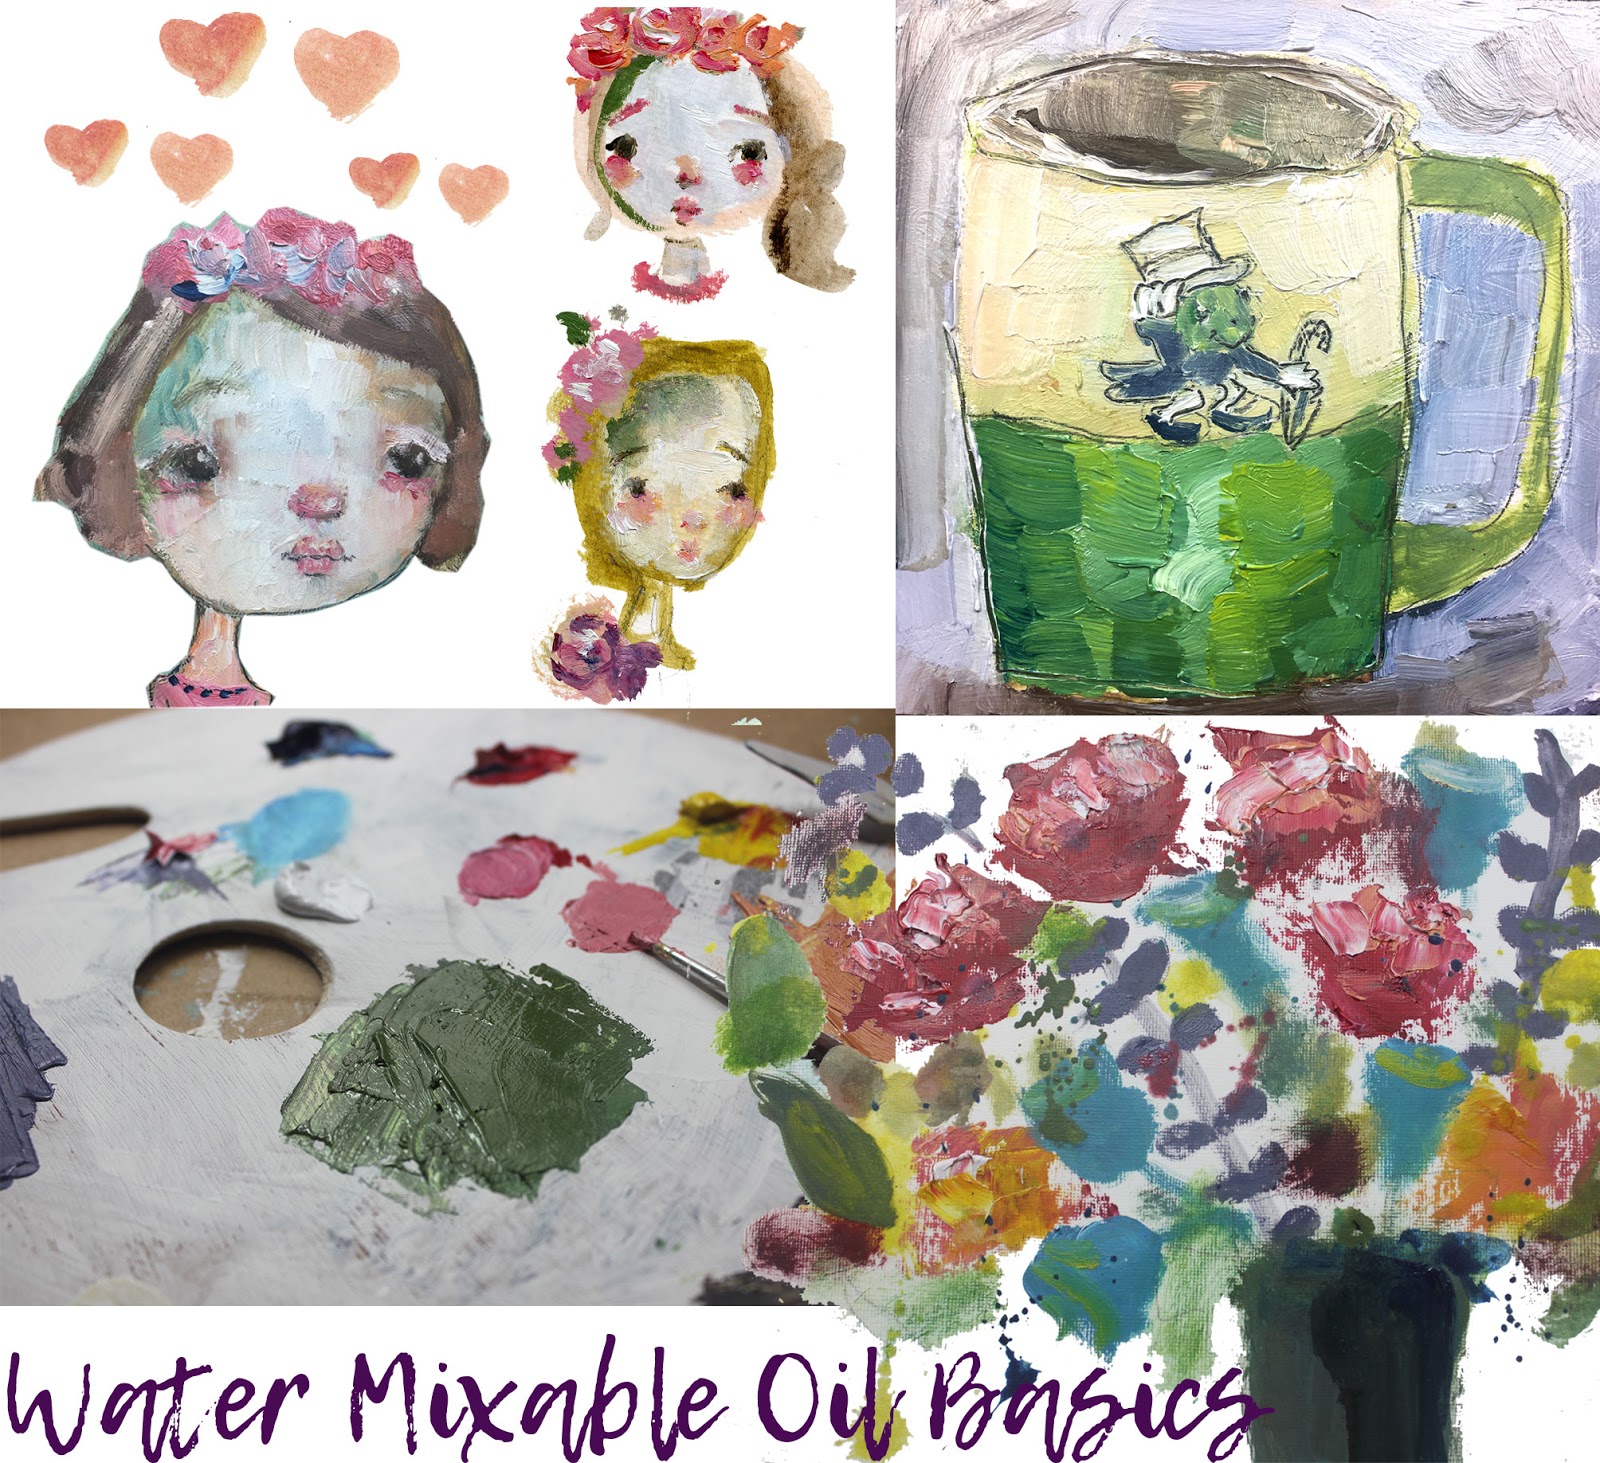 Mindy Lacefield: Water Mixable Oil Basics - online class